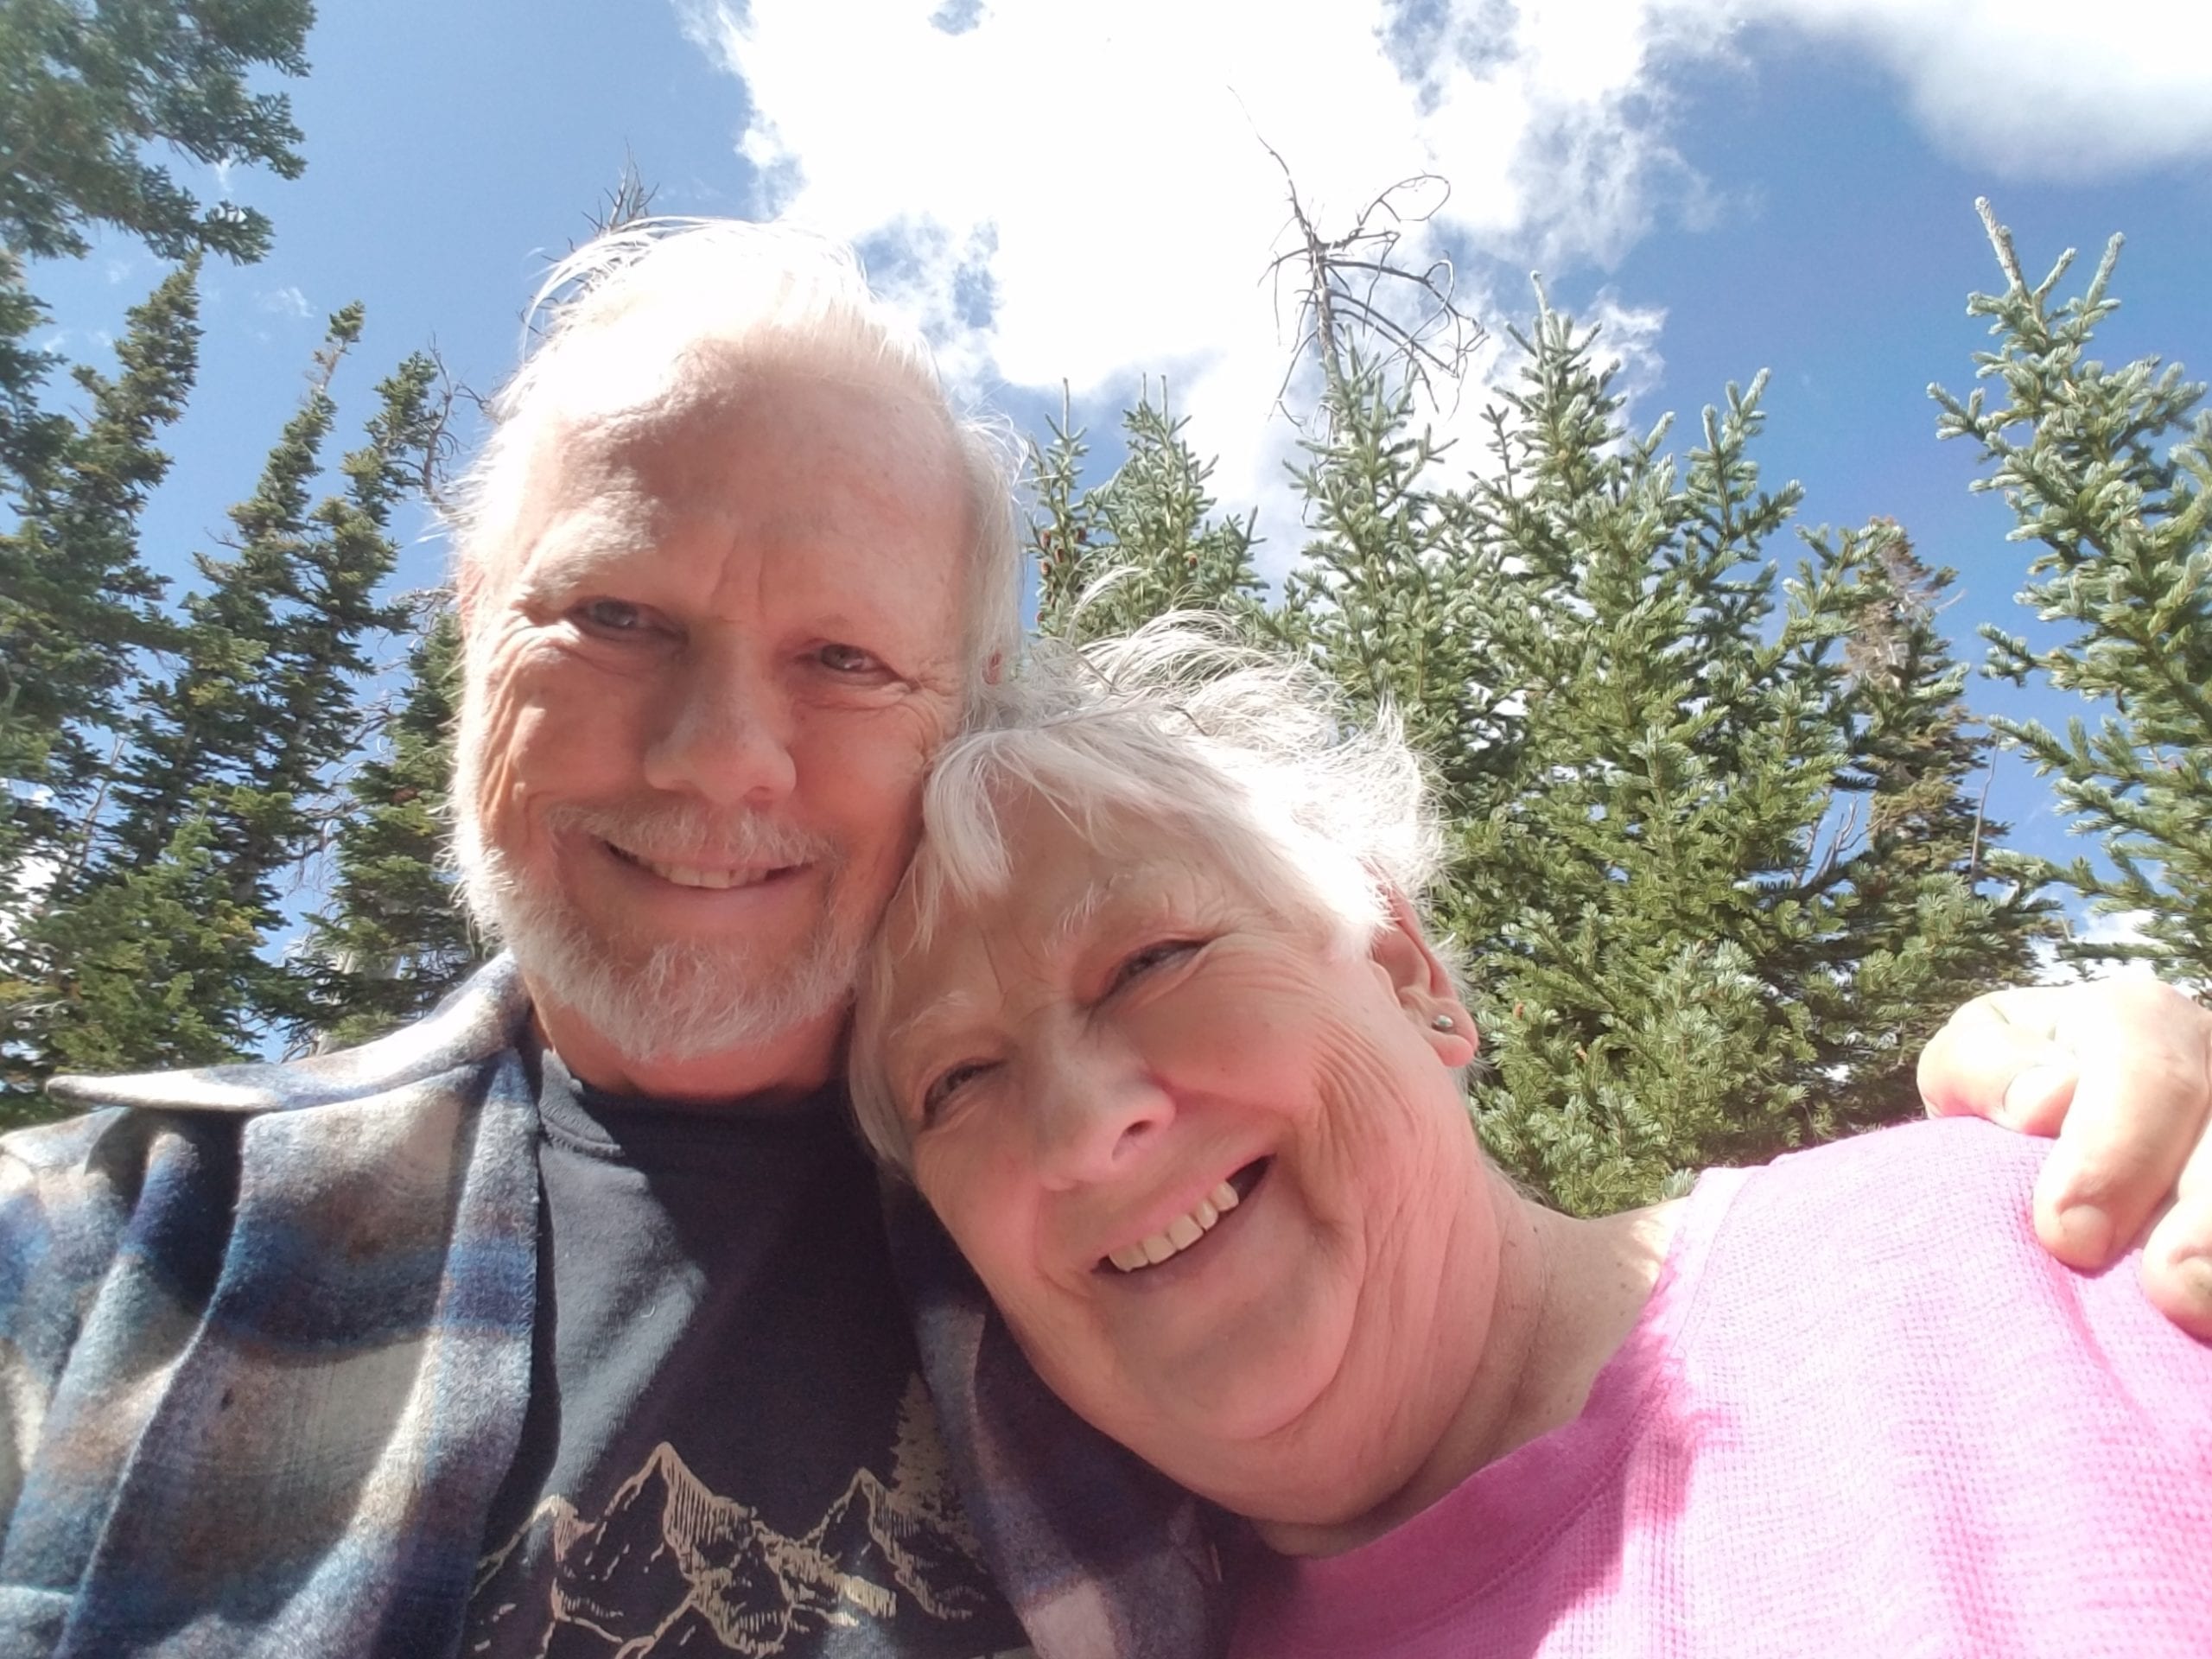 Richard Gillock, who utilized California's medical aid-in-dying law in March 2019, with his wife, Steph Campbell, in photo taken in September 2019